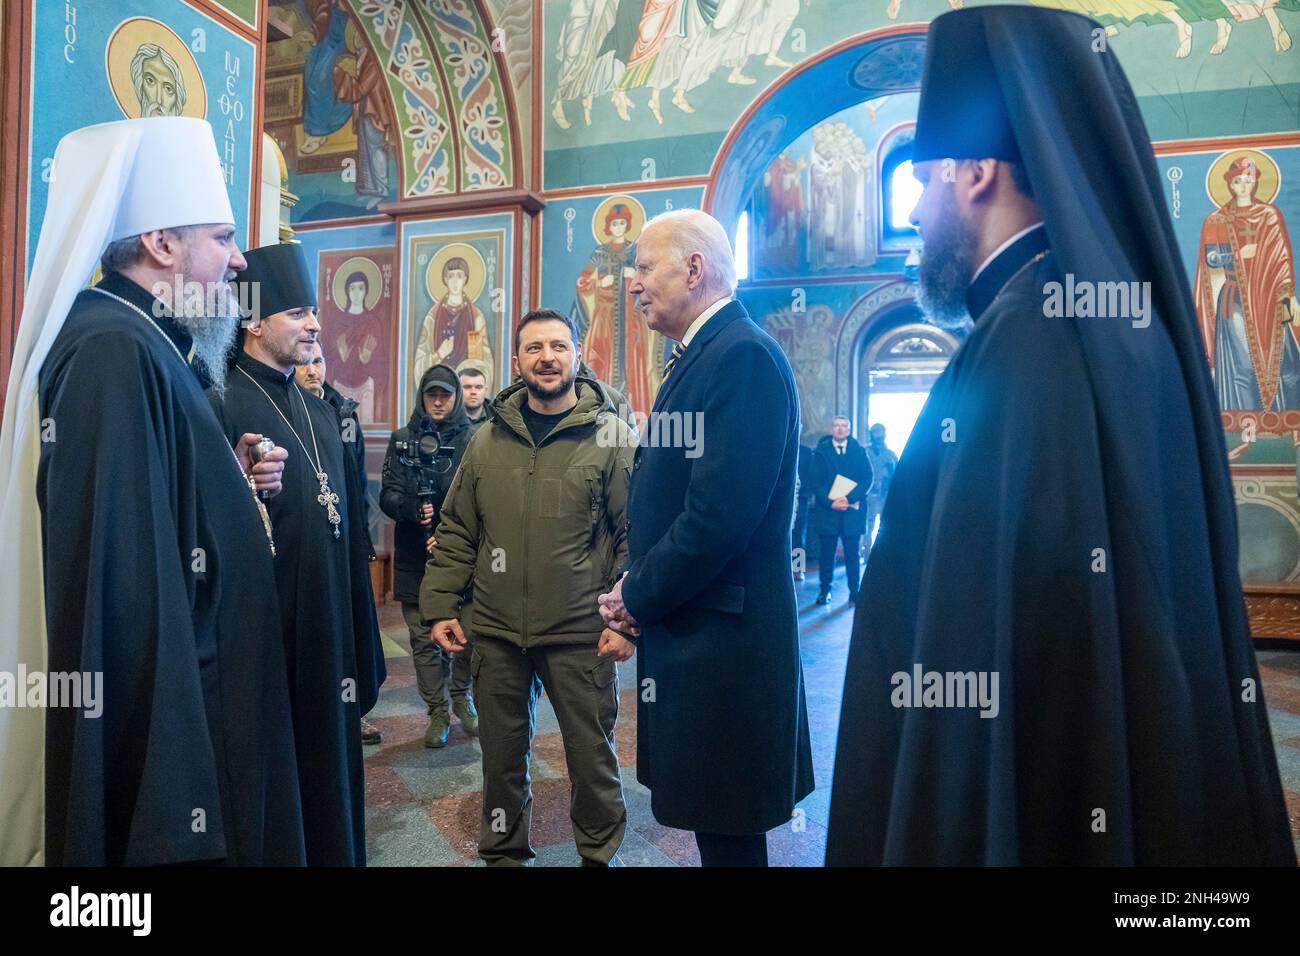 Kyiv, Ukraine. 20th Feb, 2023. U.S. President Joe Biden, right, accompanied by Ukrainian President Volodymyr Zelenskyy, center, chats with Christian Orthodox priests during a visit to the St. Michaels Golden-Domed Cathedral, February 20, 2023 in Kyiv, Ukraine. Biden stopped in Kiev on an unannounced visit to renew American support for Ukraine. Credit: Adam Schultz/White House Photo/Alamy Live News Stock Photo